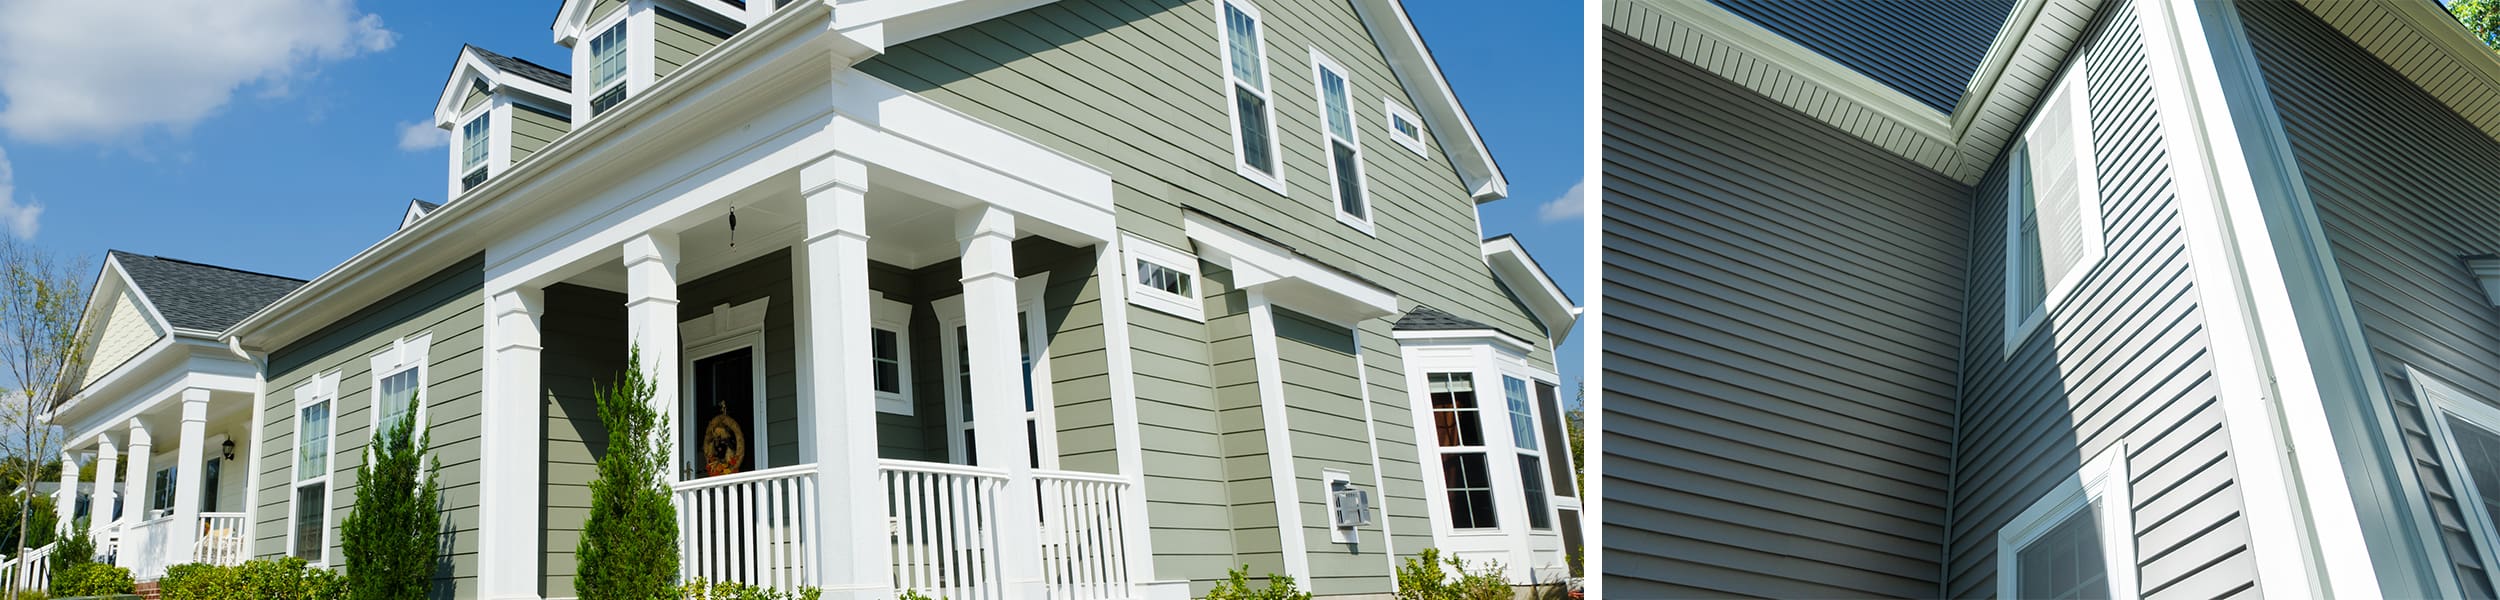 Aurora Plastics offers an exceptionally strong and durable line of compounds for siding applications, including AuroraTec™, AuroraFlex™ & Auroralite™.